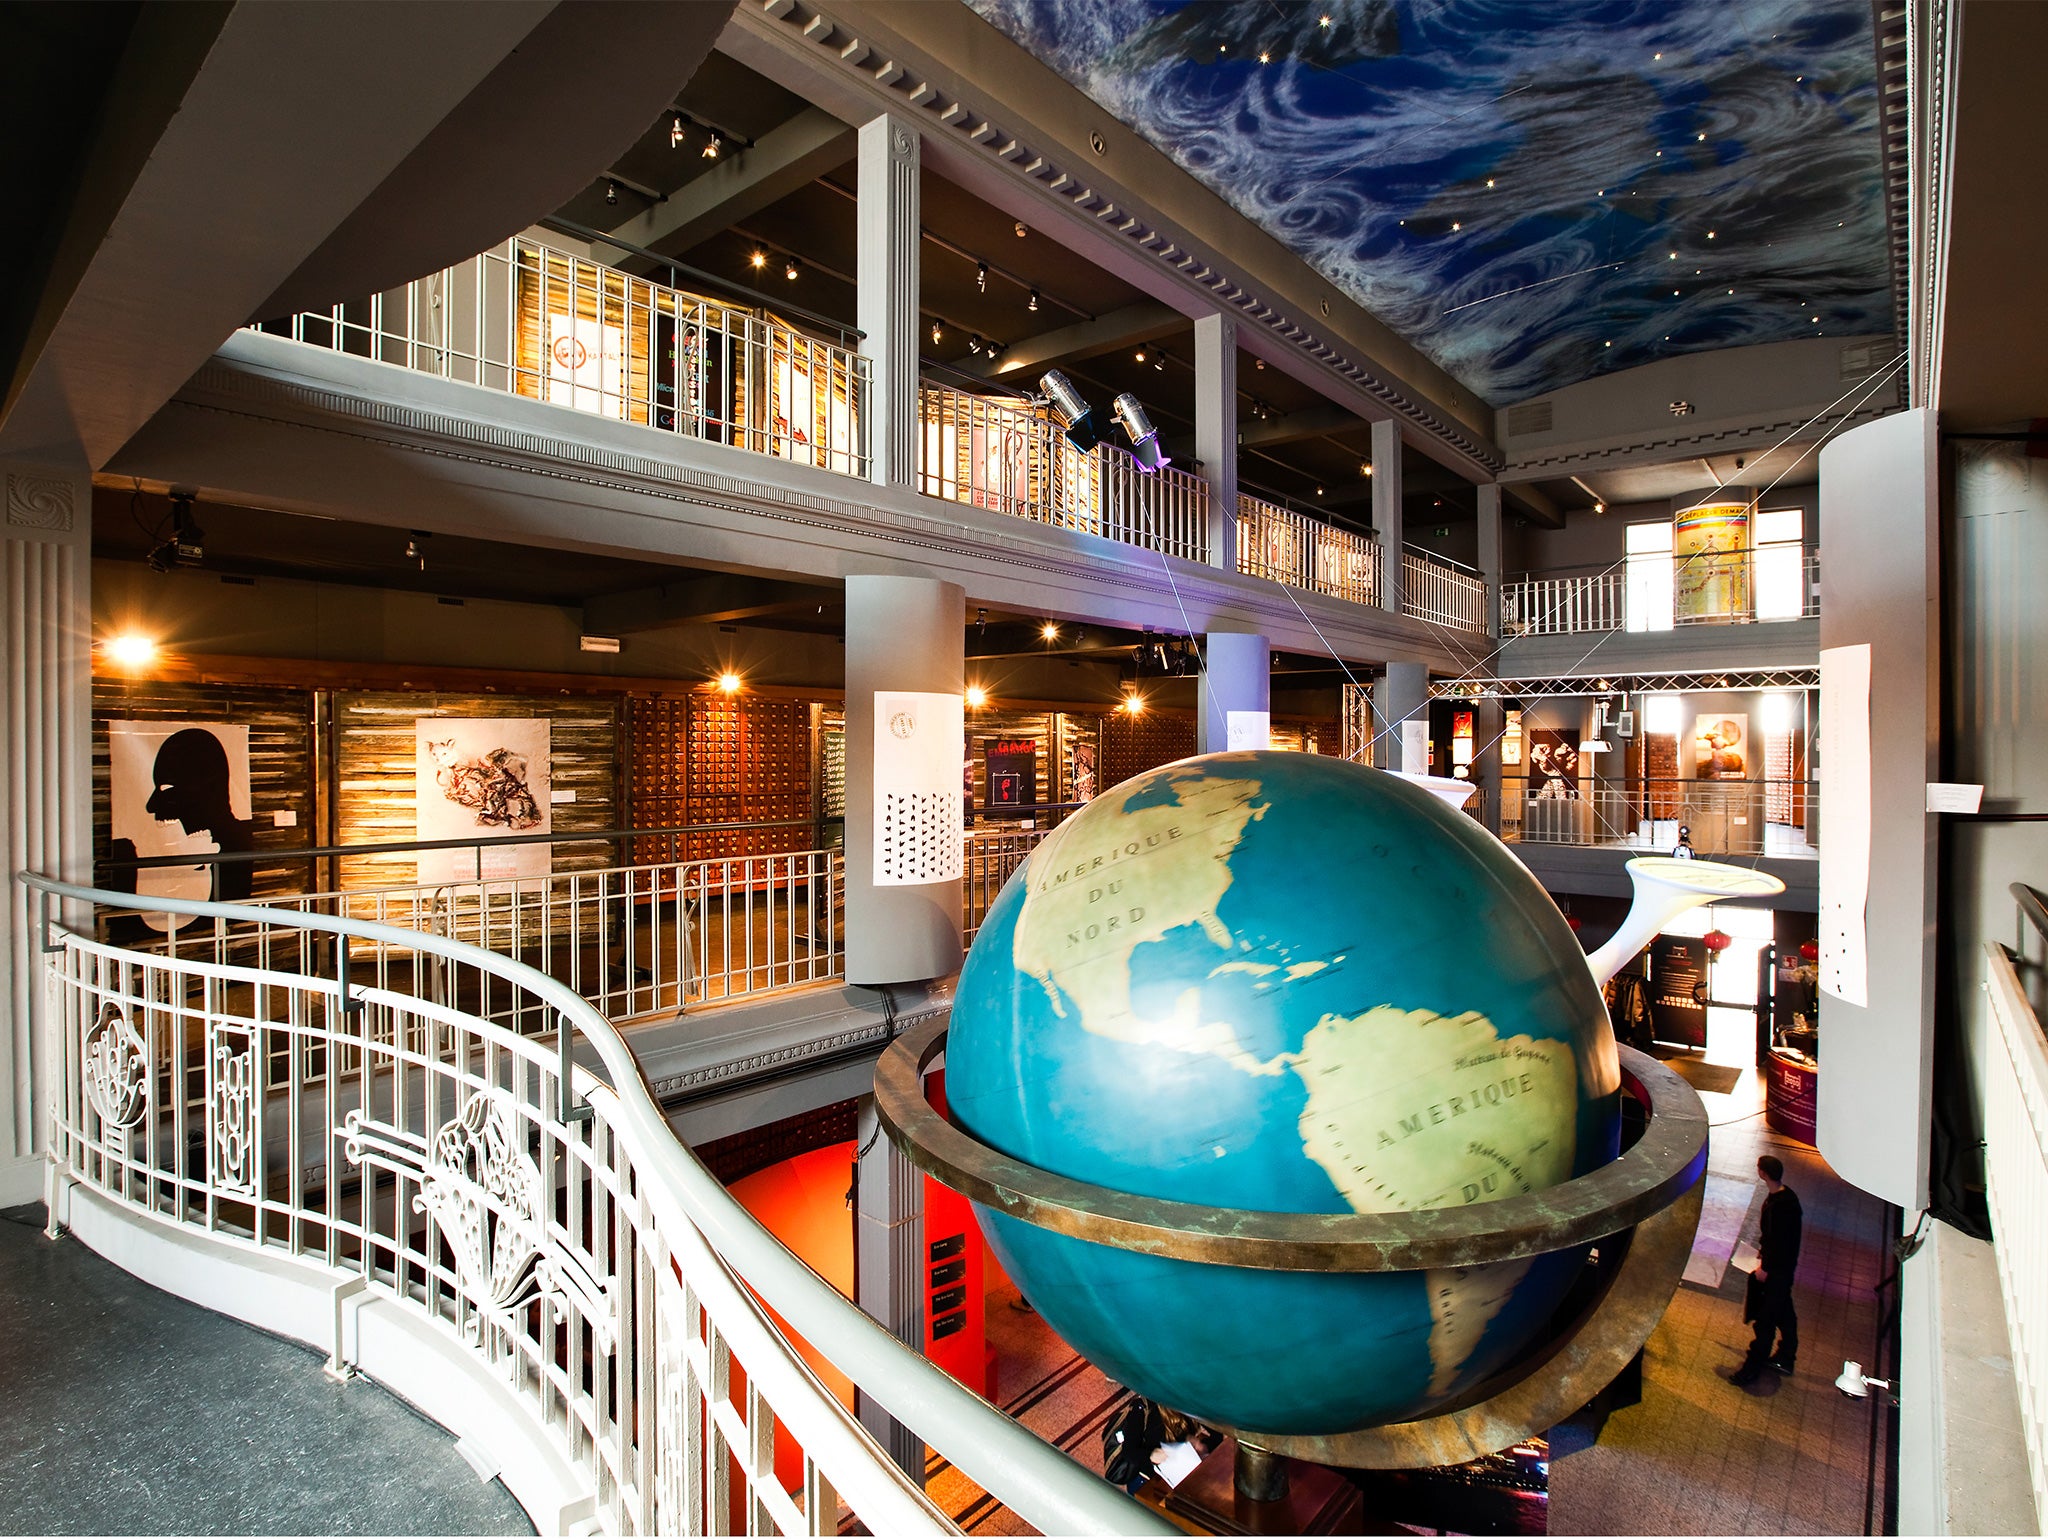 The whole world in your hands... founders of the Mundaneum aspired to catalogue all the knowledge